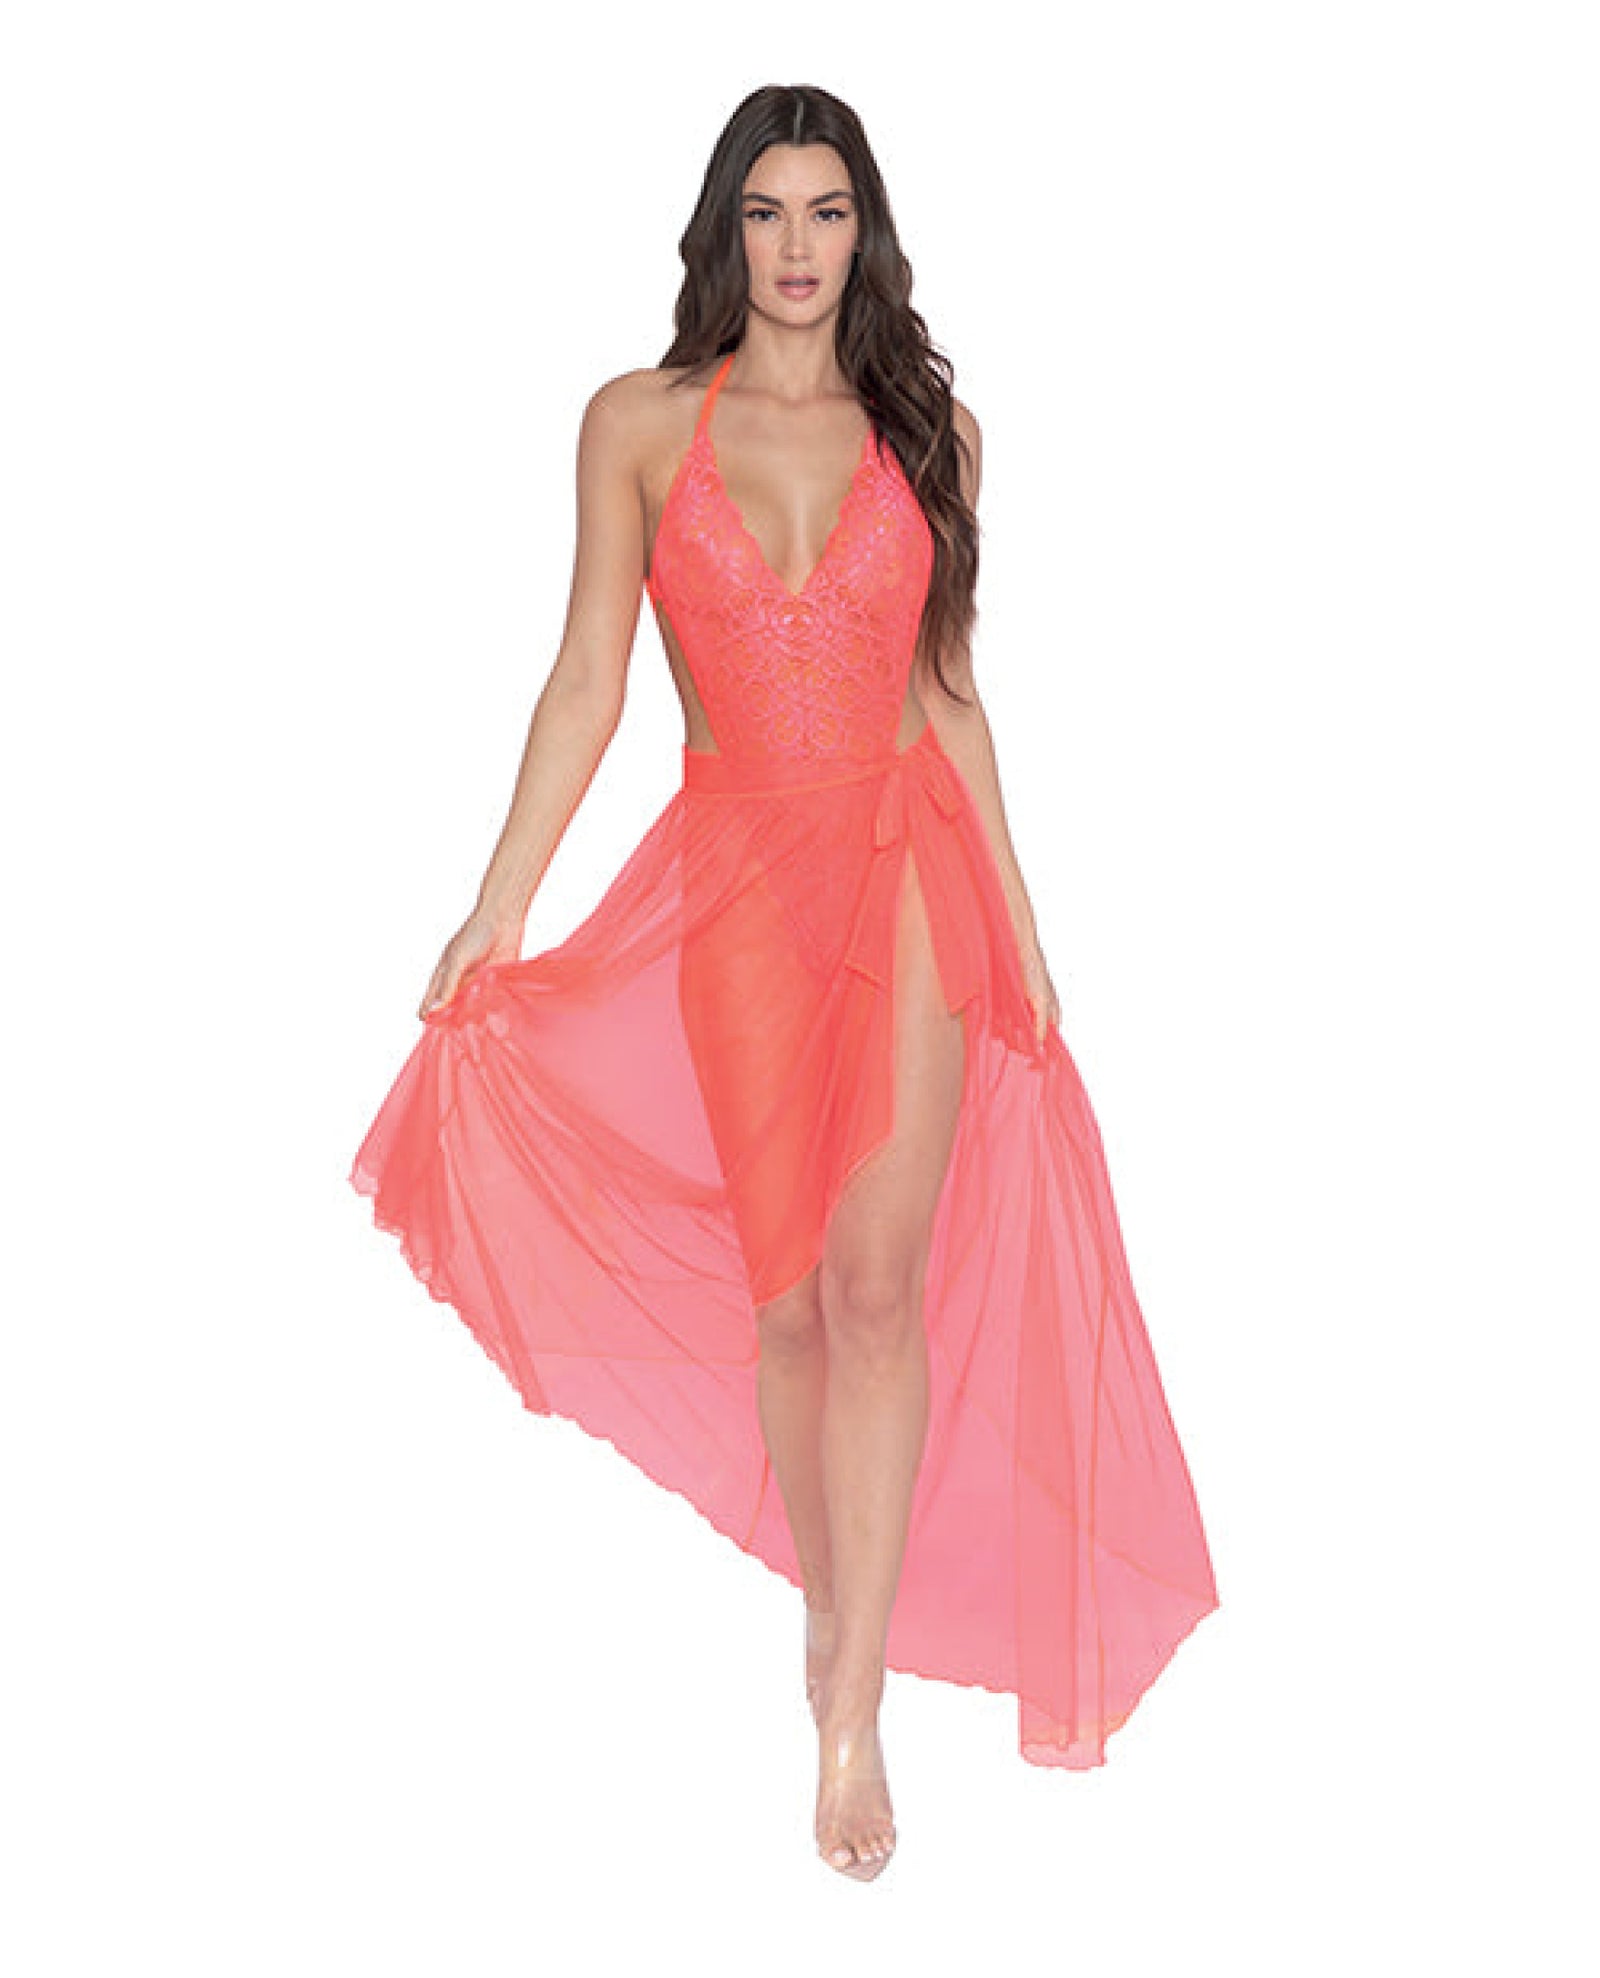 Simply Sexy Stretch Lace Teddy & Sheer Mesh Maxi Skirt W/adjustable Straps & G-string Coral Dreamgirl